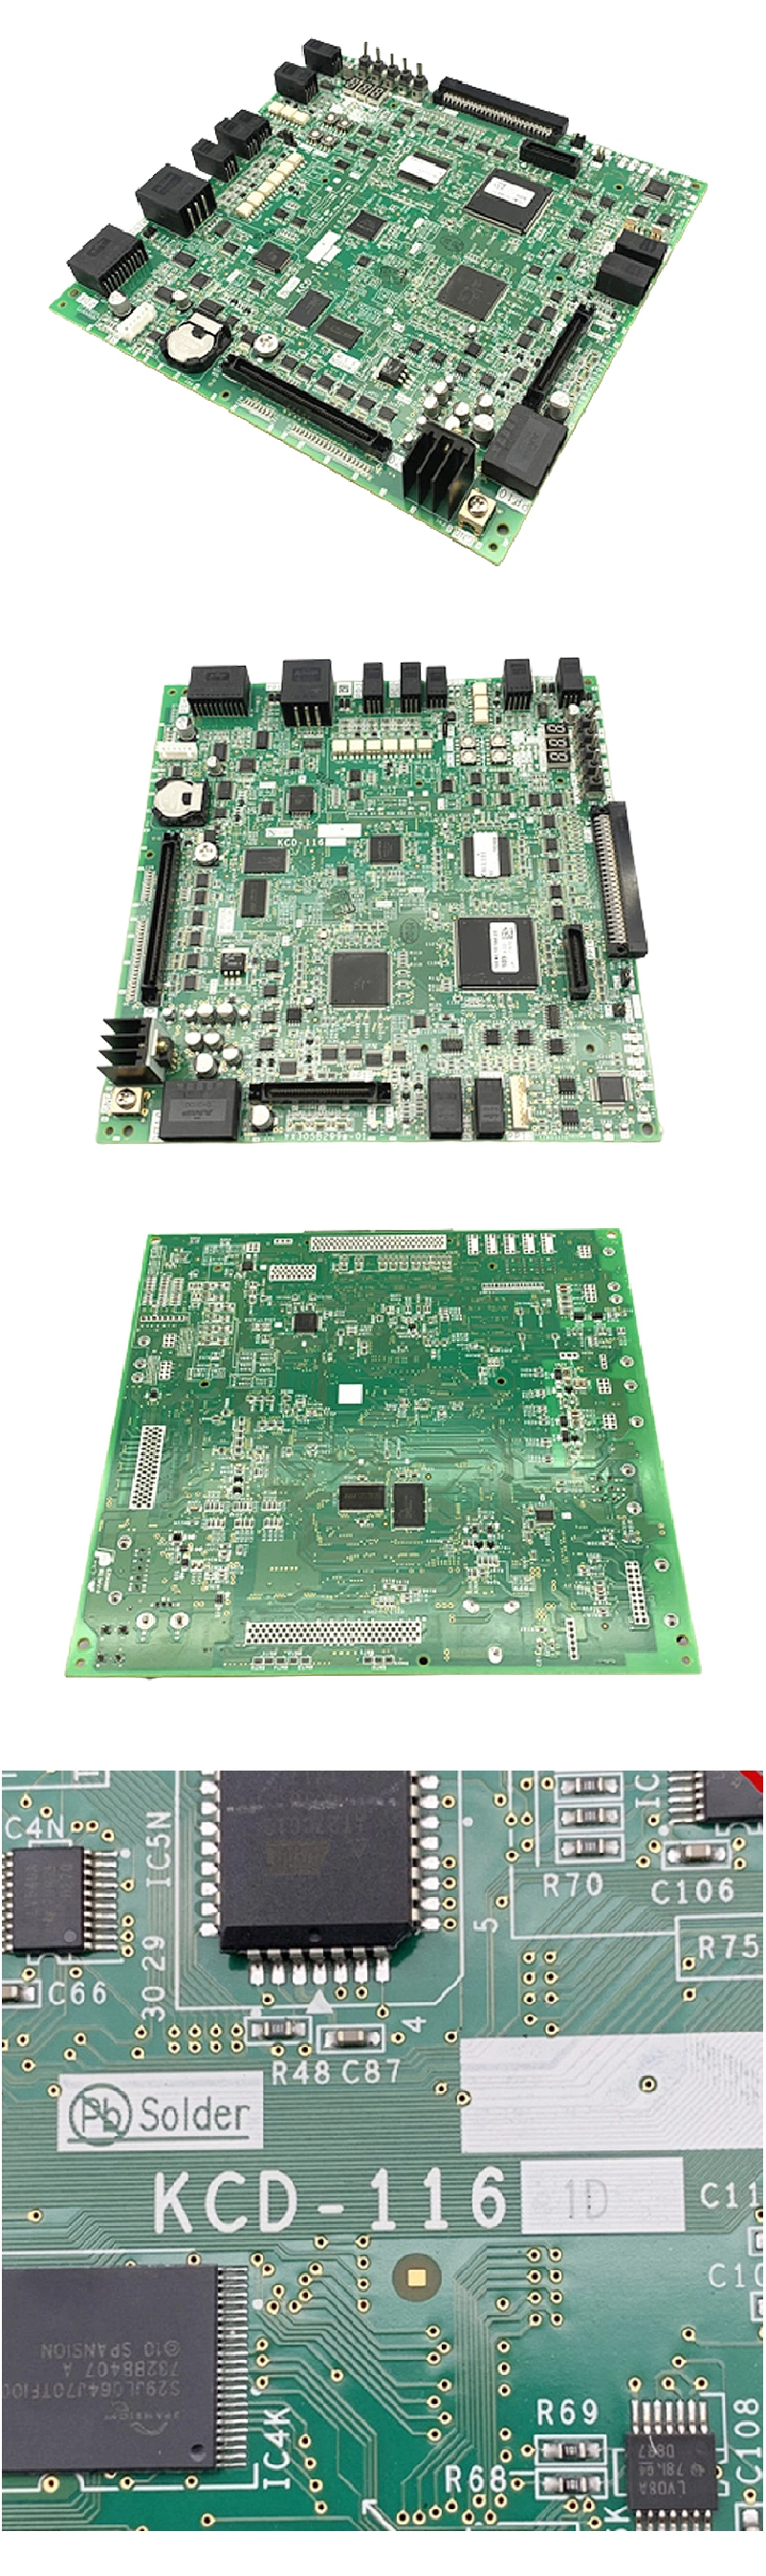 Kcd-1161A B C D Kcd-1162D B C a Mitsubishi Elevator Machine Roomless Motherboard